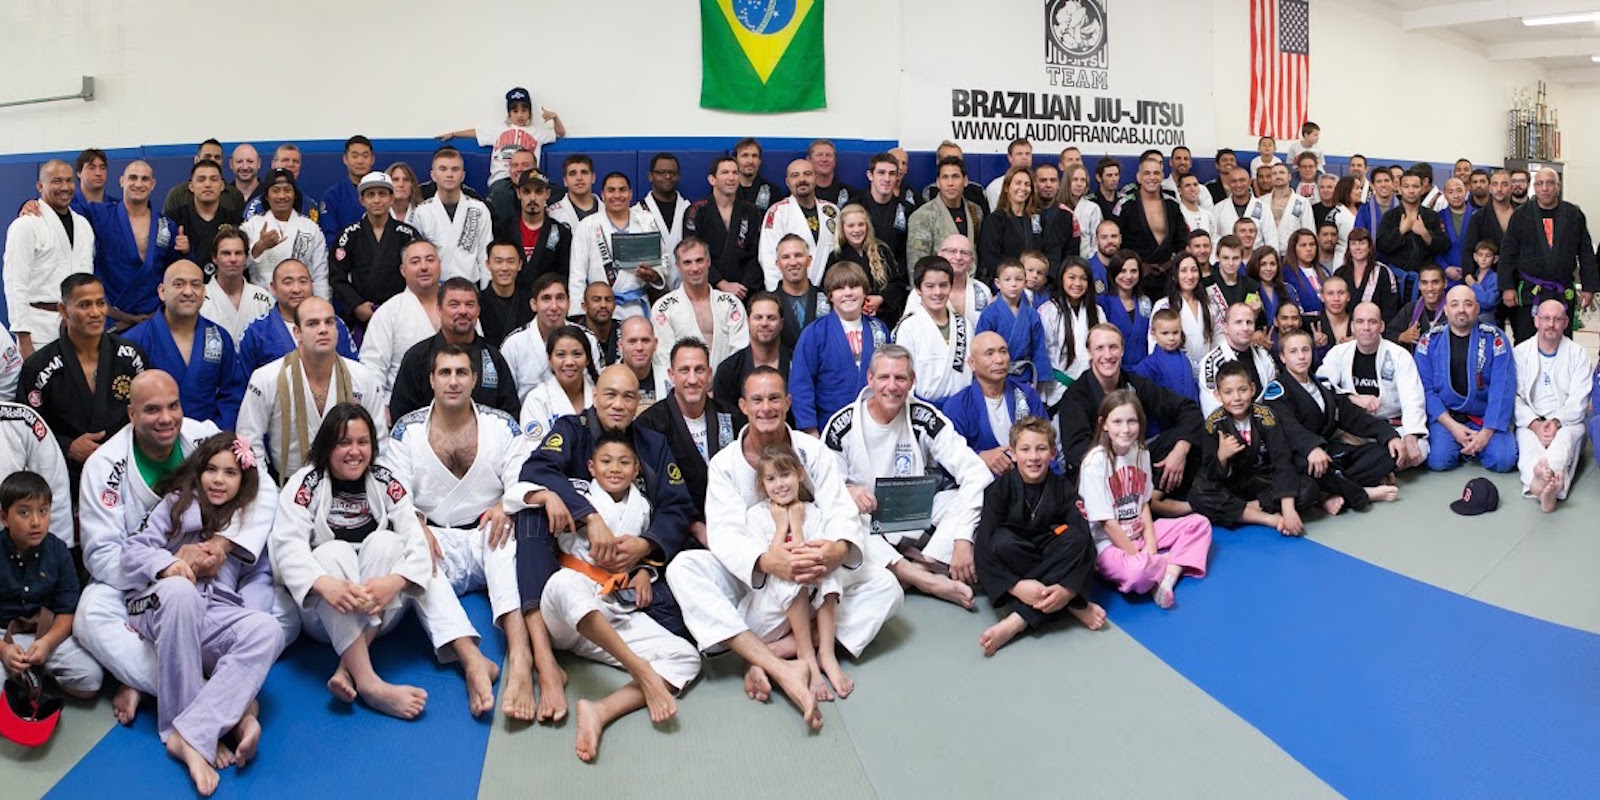 Thank You from Claudio França BJJ